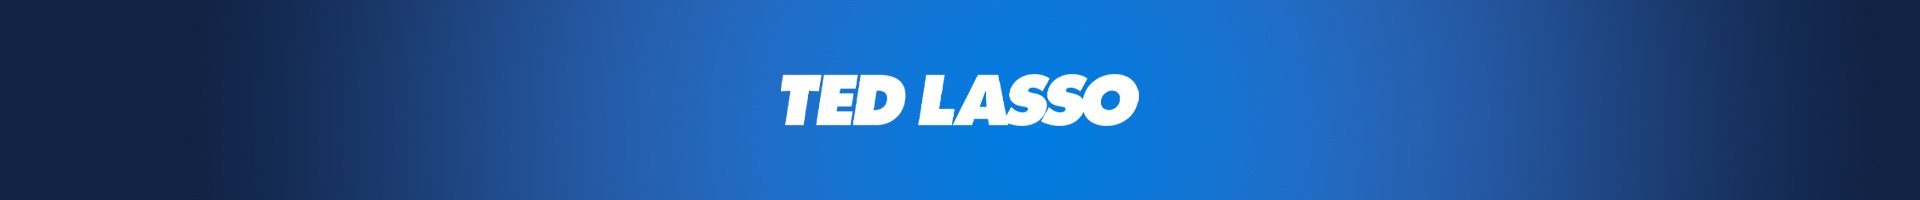 Ted Lasso | Shop Tees, Mugs, and More | Official WB Shop UK